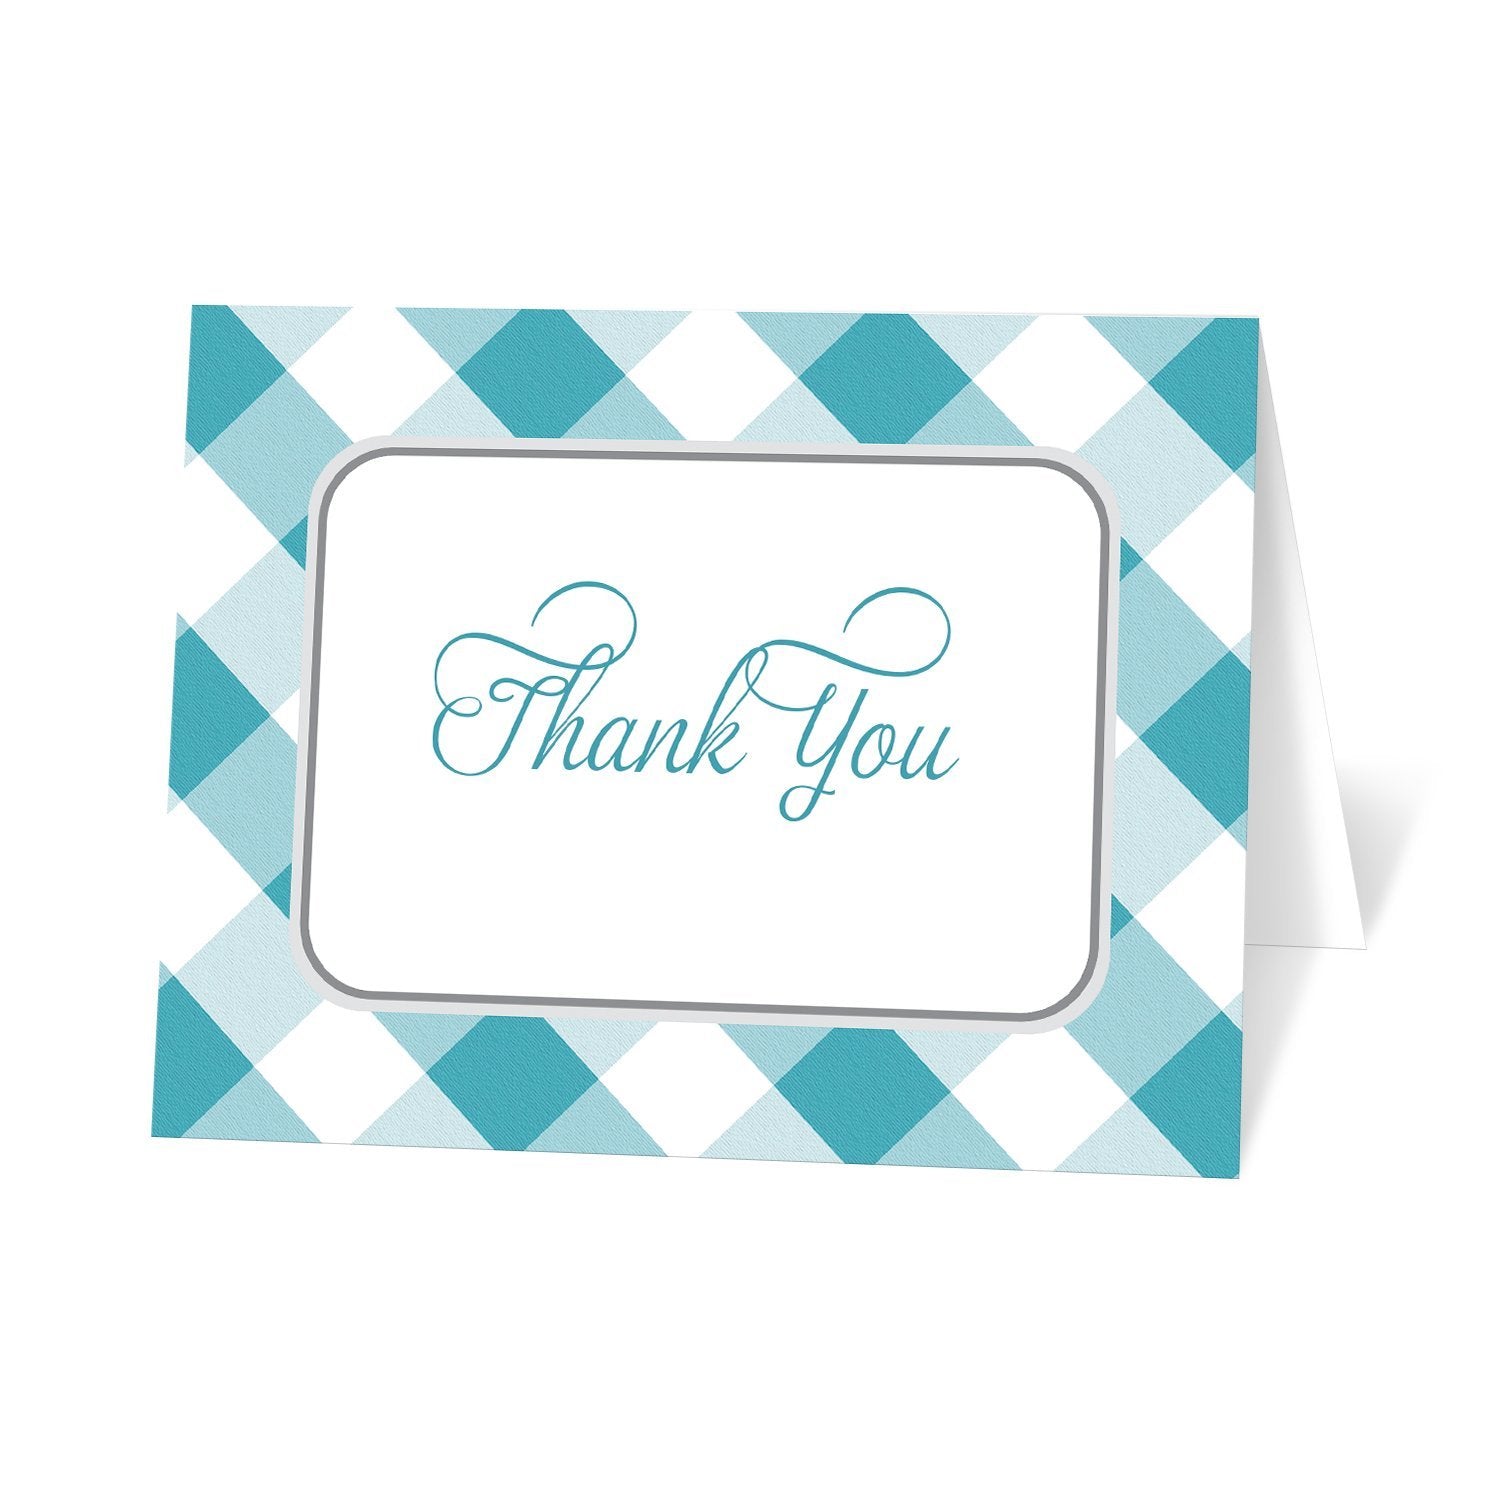 Turquoise Gingham Thank You Cards at Artistically Invited. Turquoise gingham thank you cards with 'Thank You' printed in a turquoise script font inside a white rounded corner frame outlined in gray. The background of these turquoise gingham thank you cards is a classic southern turquoise and white gingham pattern. 